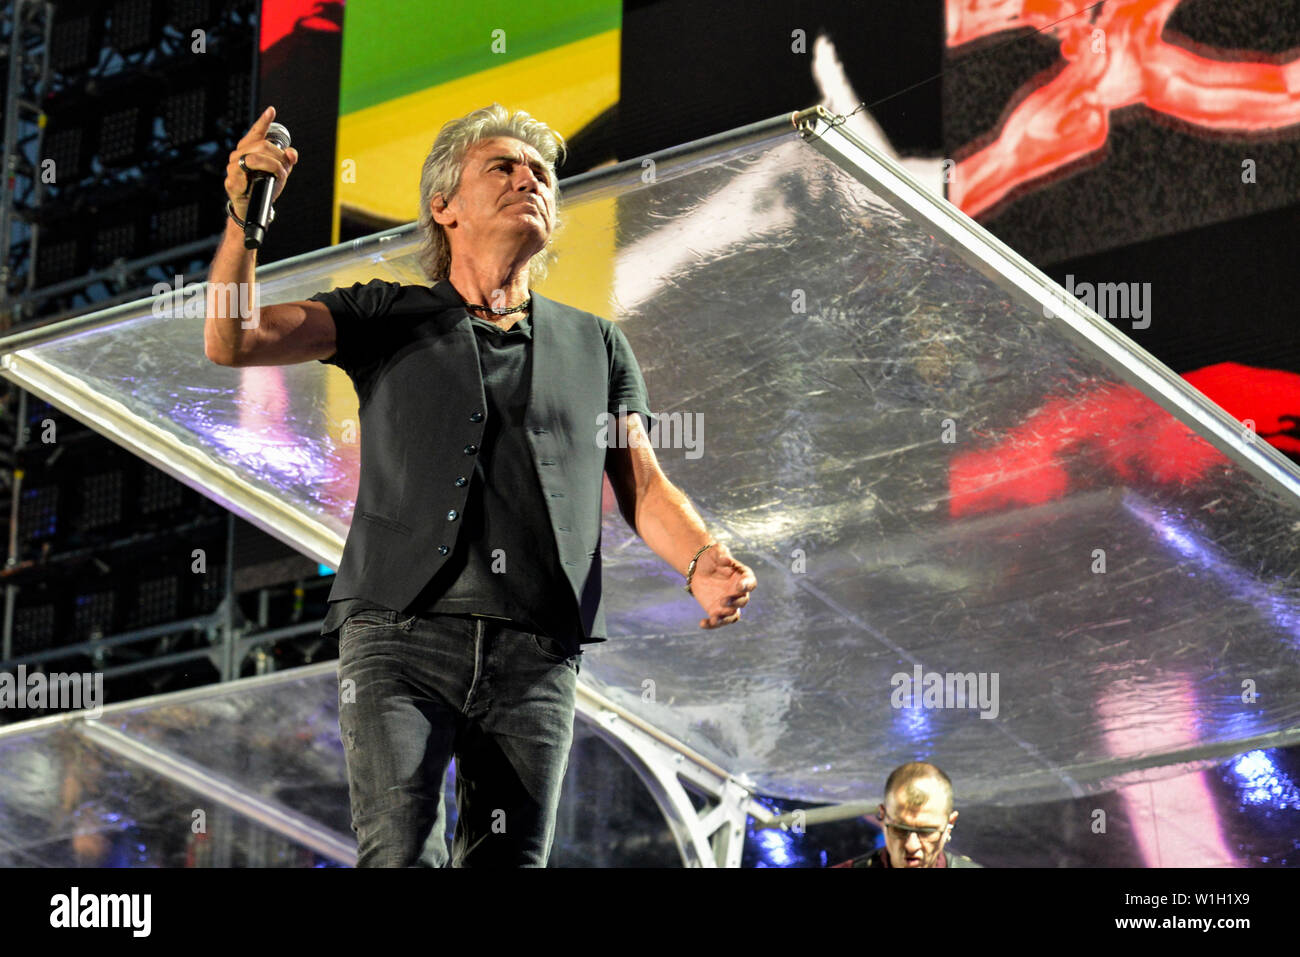 Luciano Ligabue performs live on stage at the Stadio Olimpico Grande Torino in Turin for the “Start Tour 2019”. Stock Photo